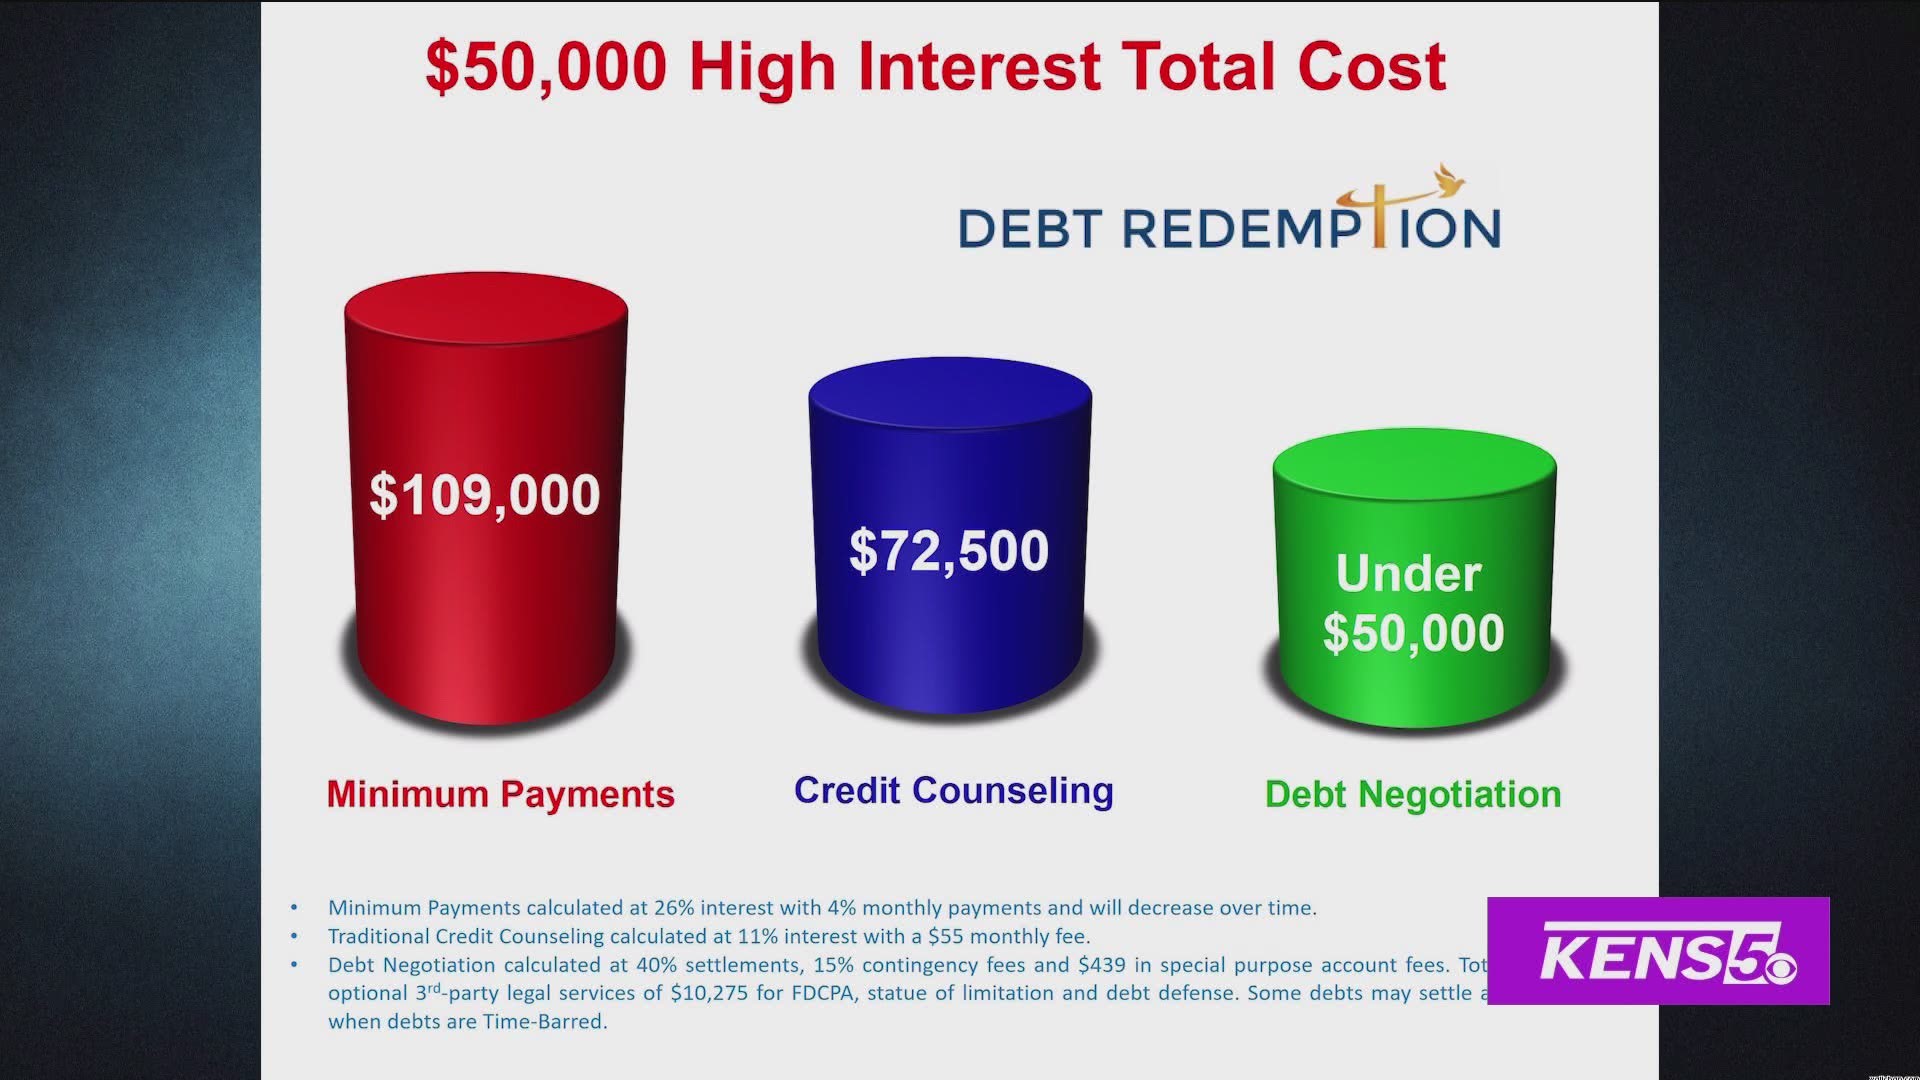 Debt Redemption is helping San Antonians pay off their debt quicker than they would if they were only making minimum payments!